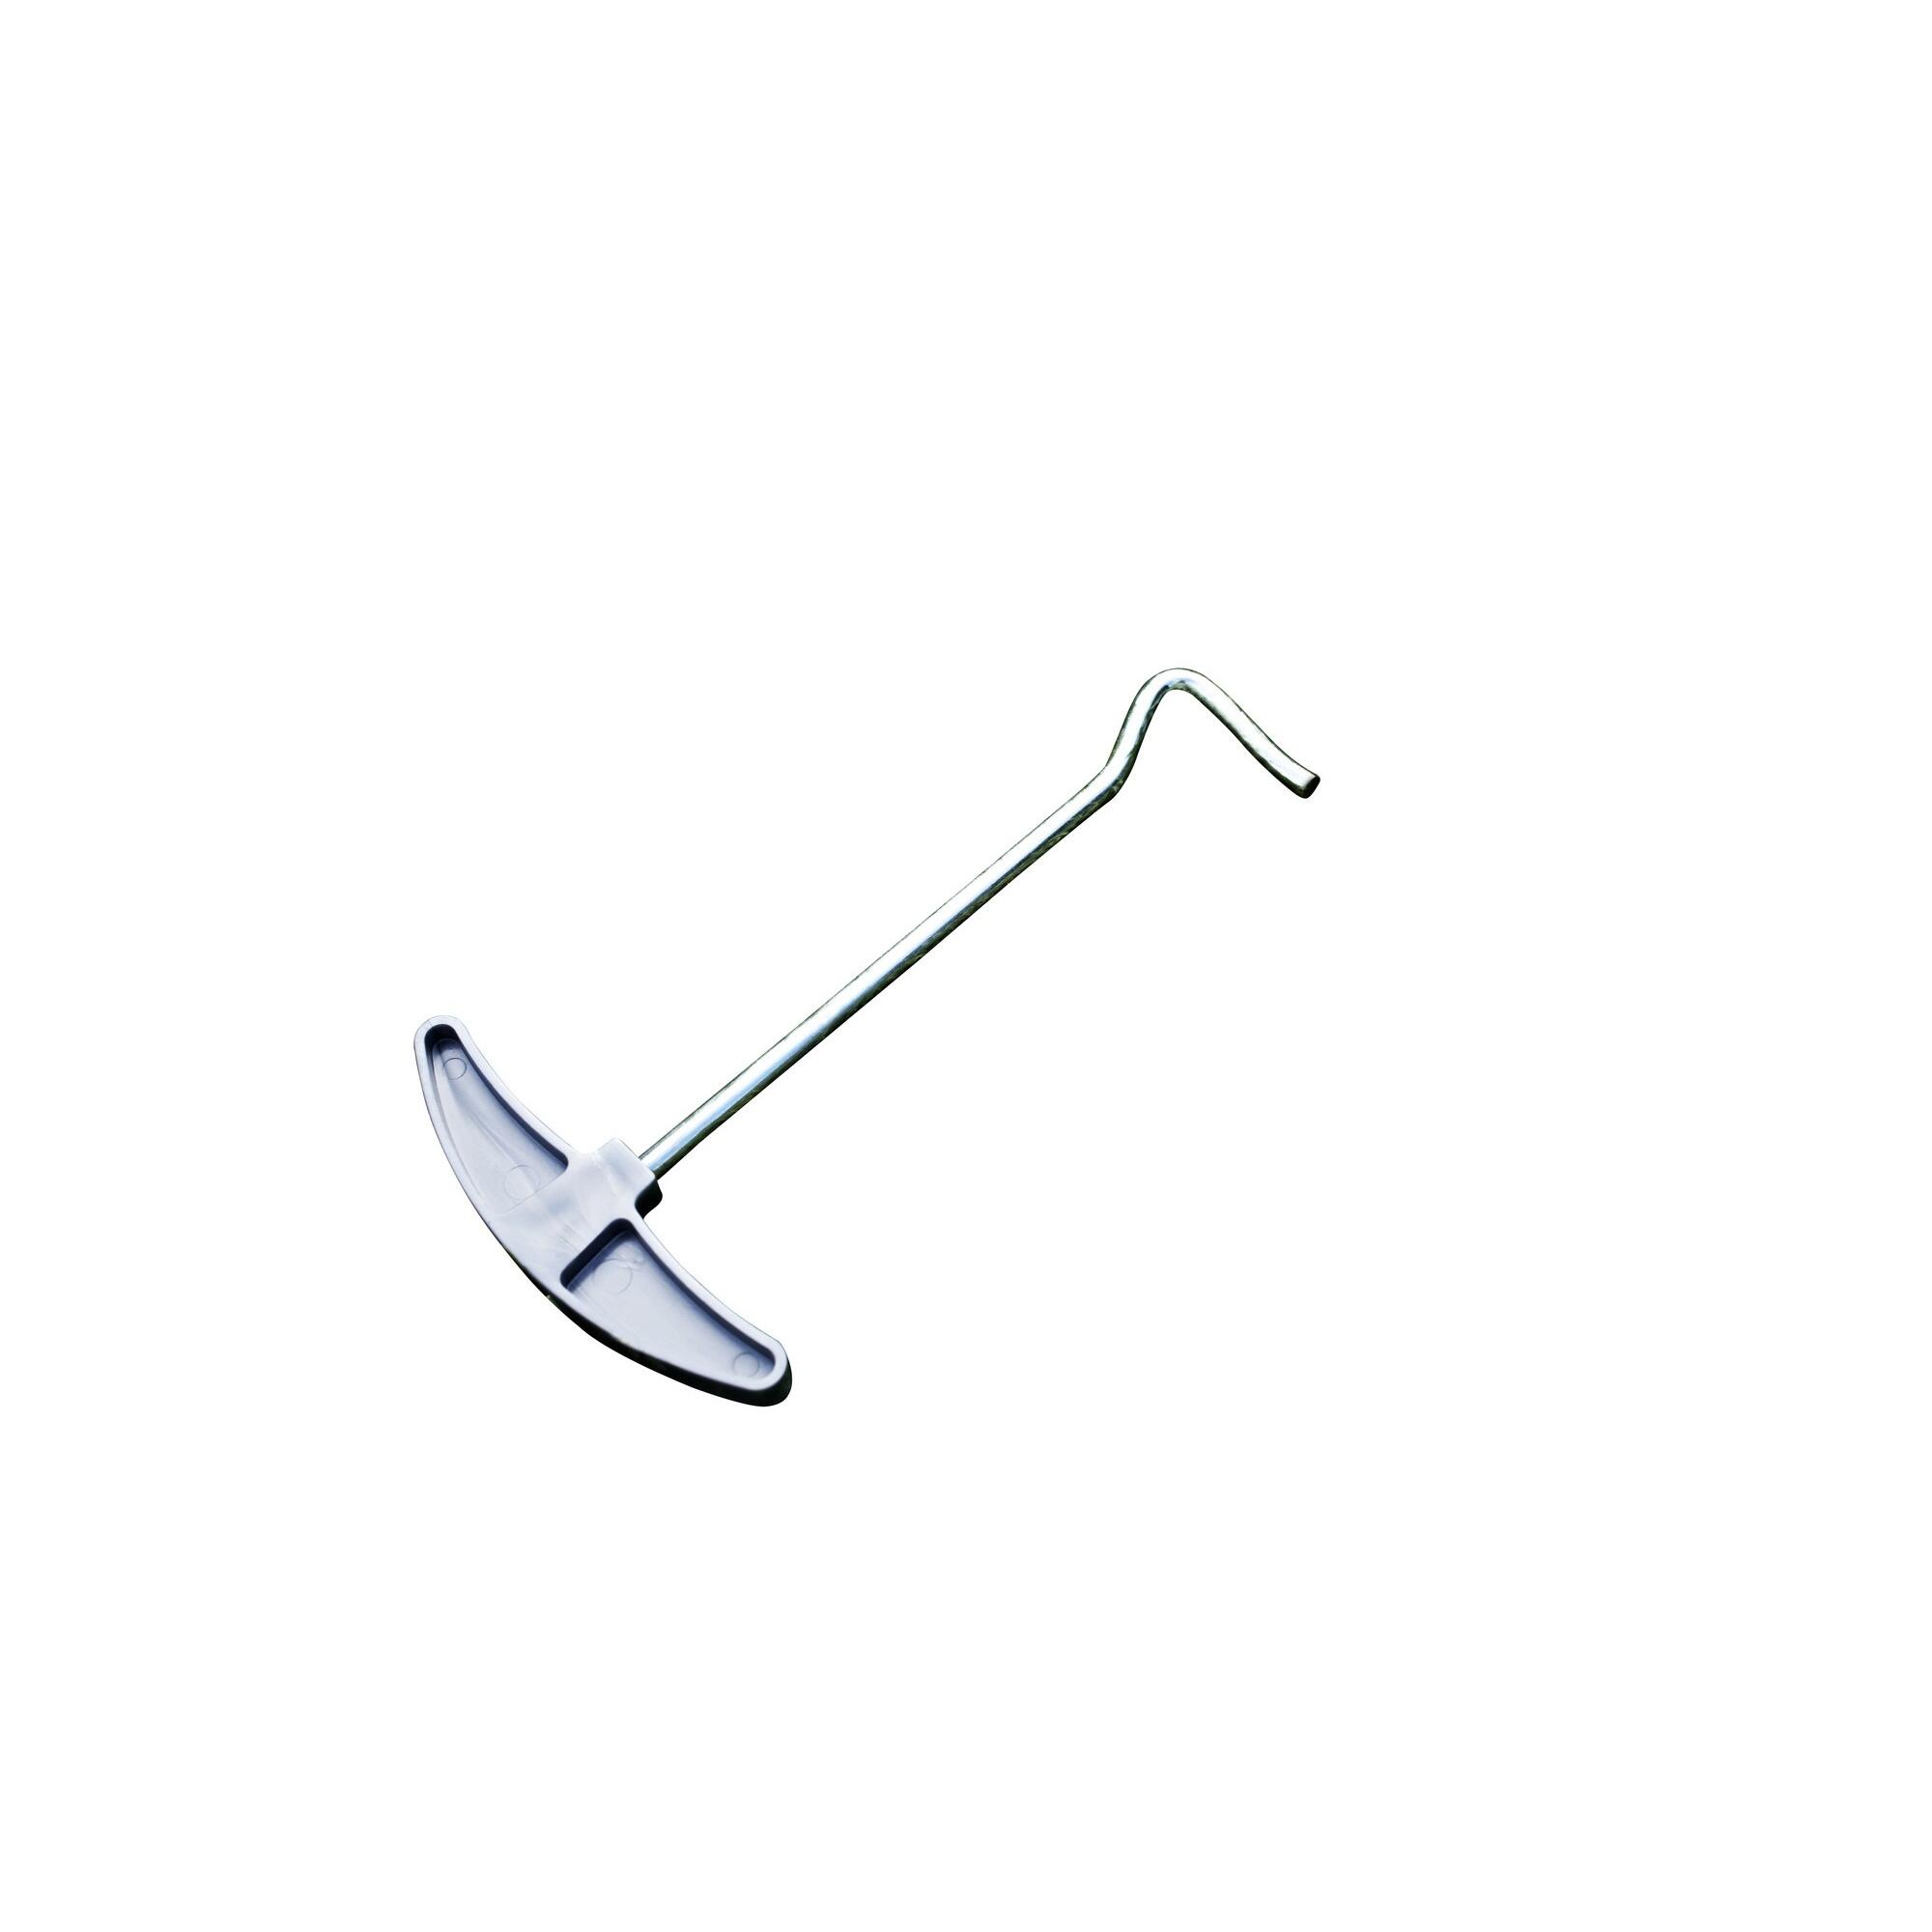 REGATTA Great Outdoors Tent Peg Extractor Tool (Silver)